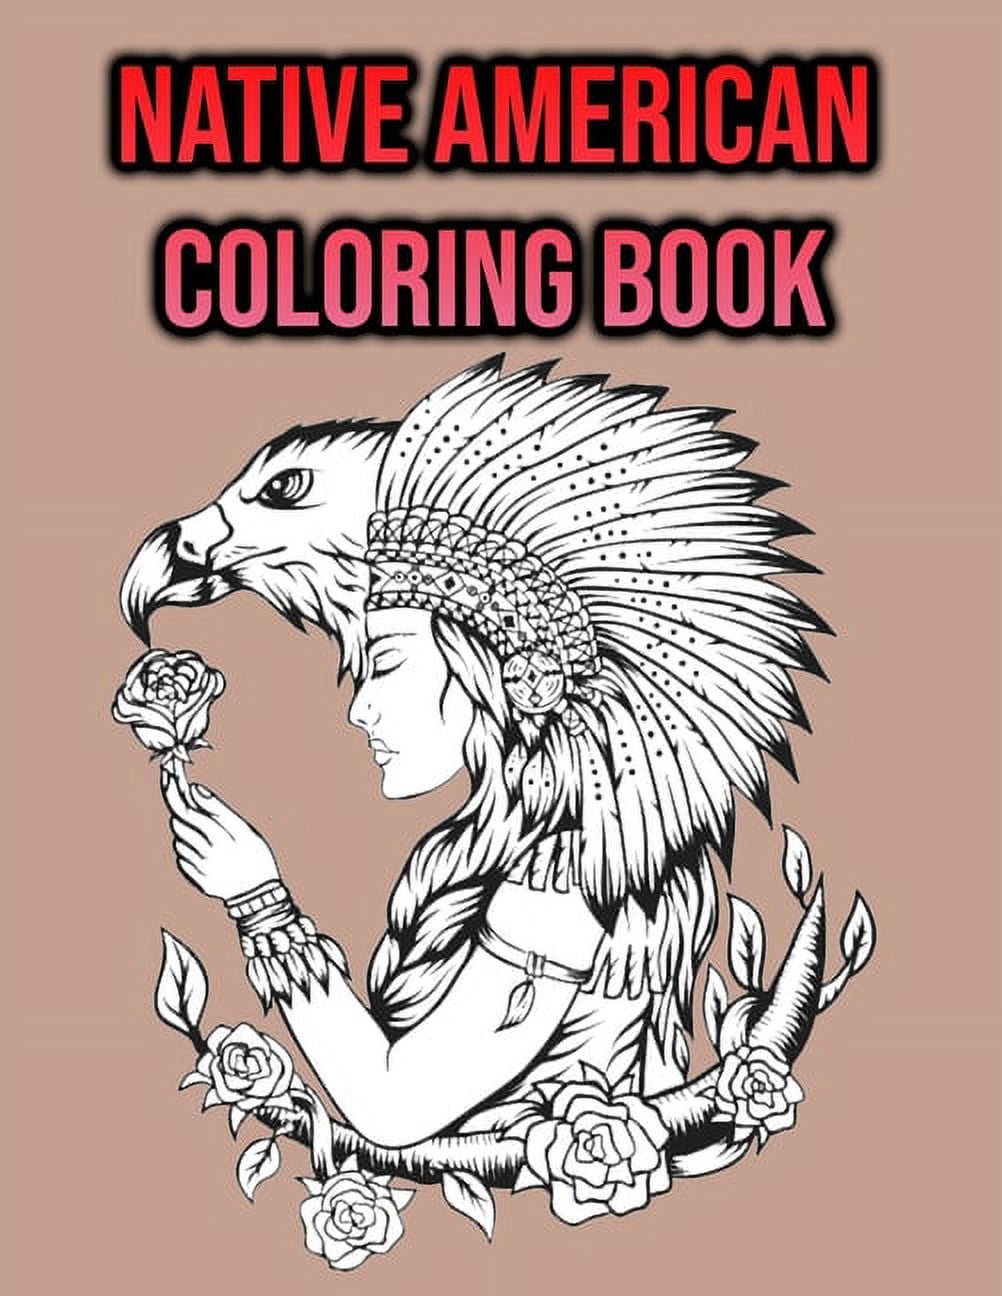 Native American Childrens Coloring Books: The Coloring Pages, design for  kids, Children, Boys, Girls and Adults (Funny Animals #5)